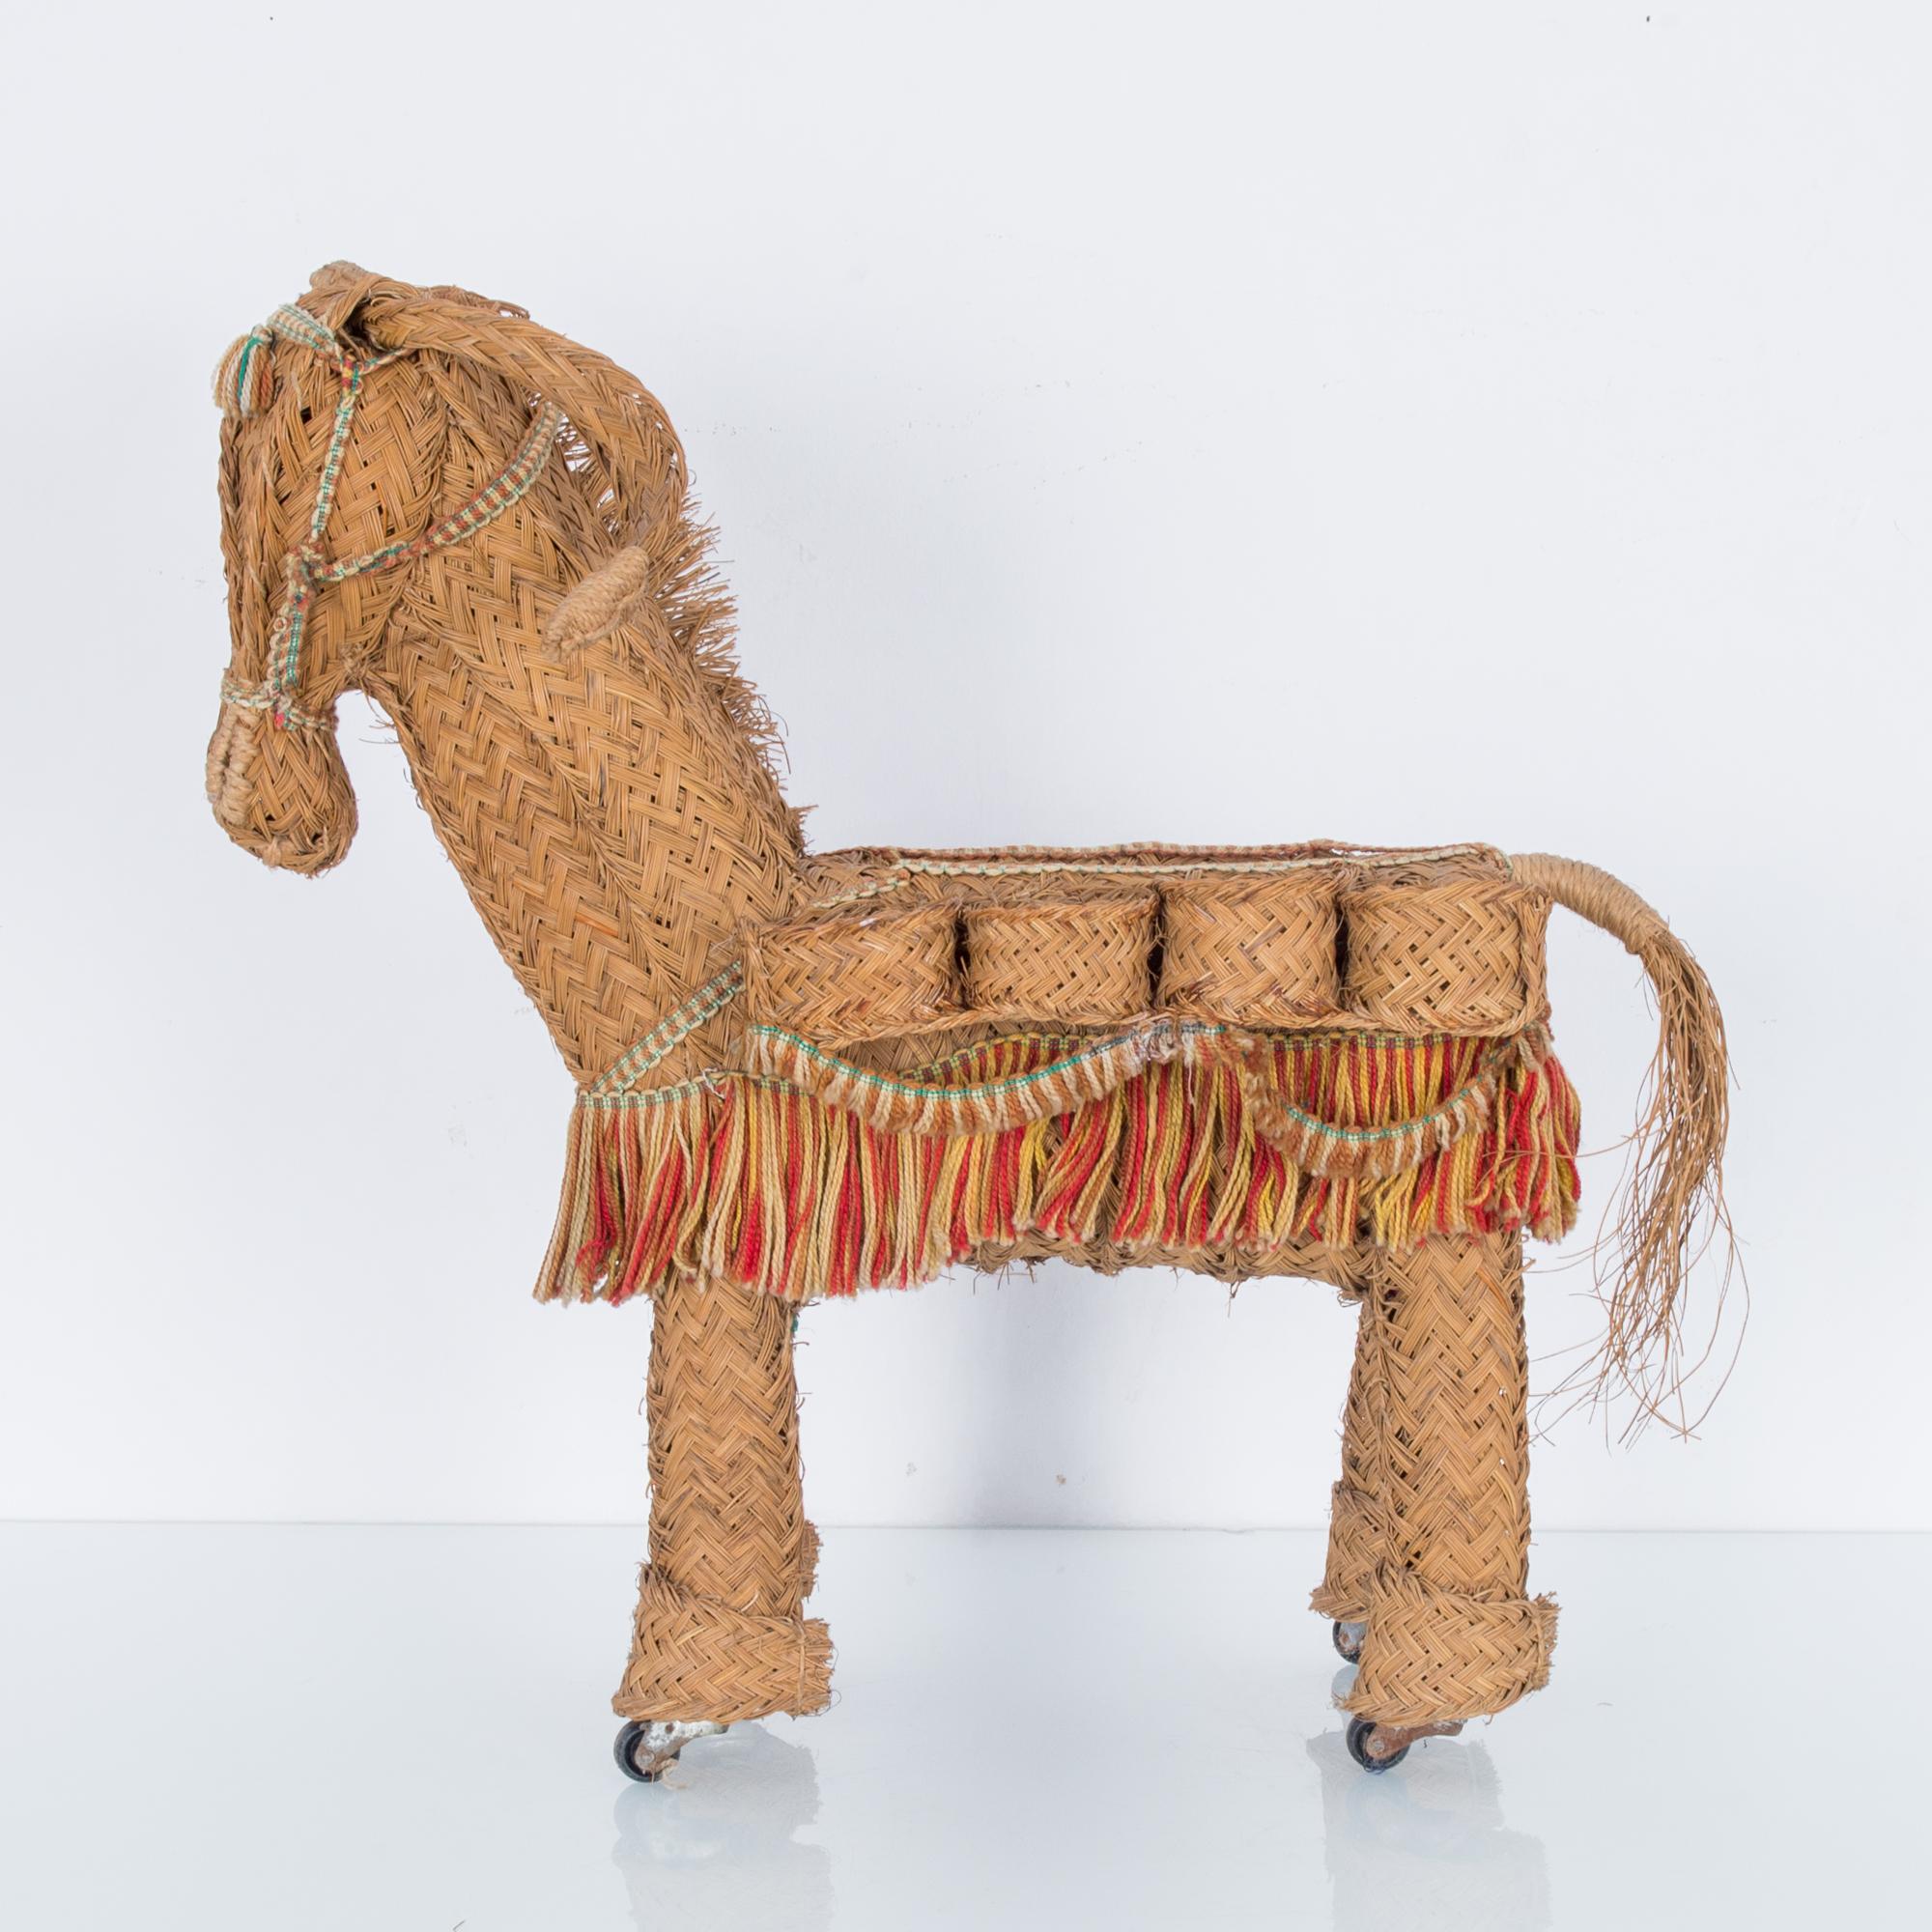 A decorative wicker donkey on wheels from Morocco, circa 1960s. An artisan piece with a rustic, Mediterranean feel. Wicker side baskets evoke goods sold at a market or roadside, while decorative fringe adds a carnival touch of color. The jaunty tilt